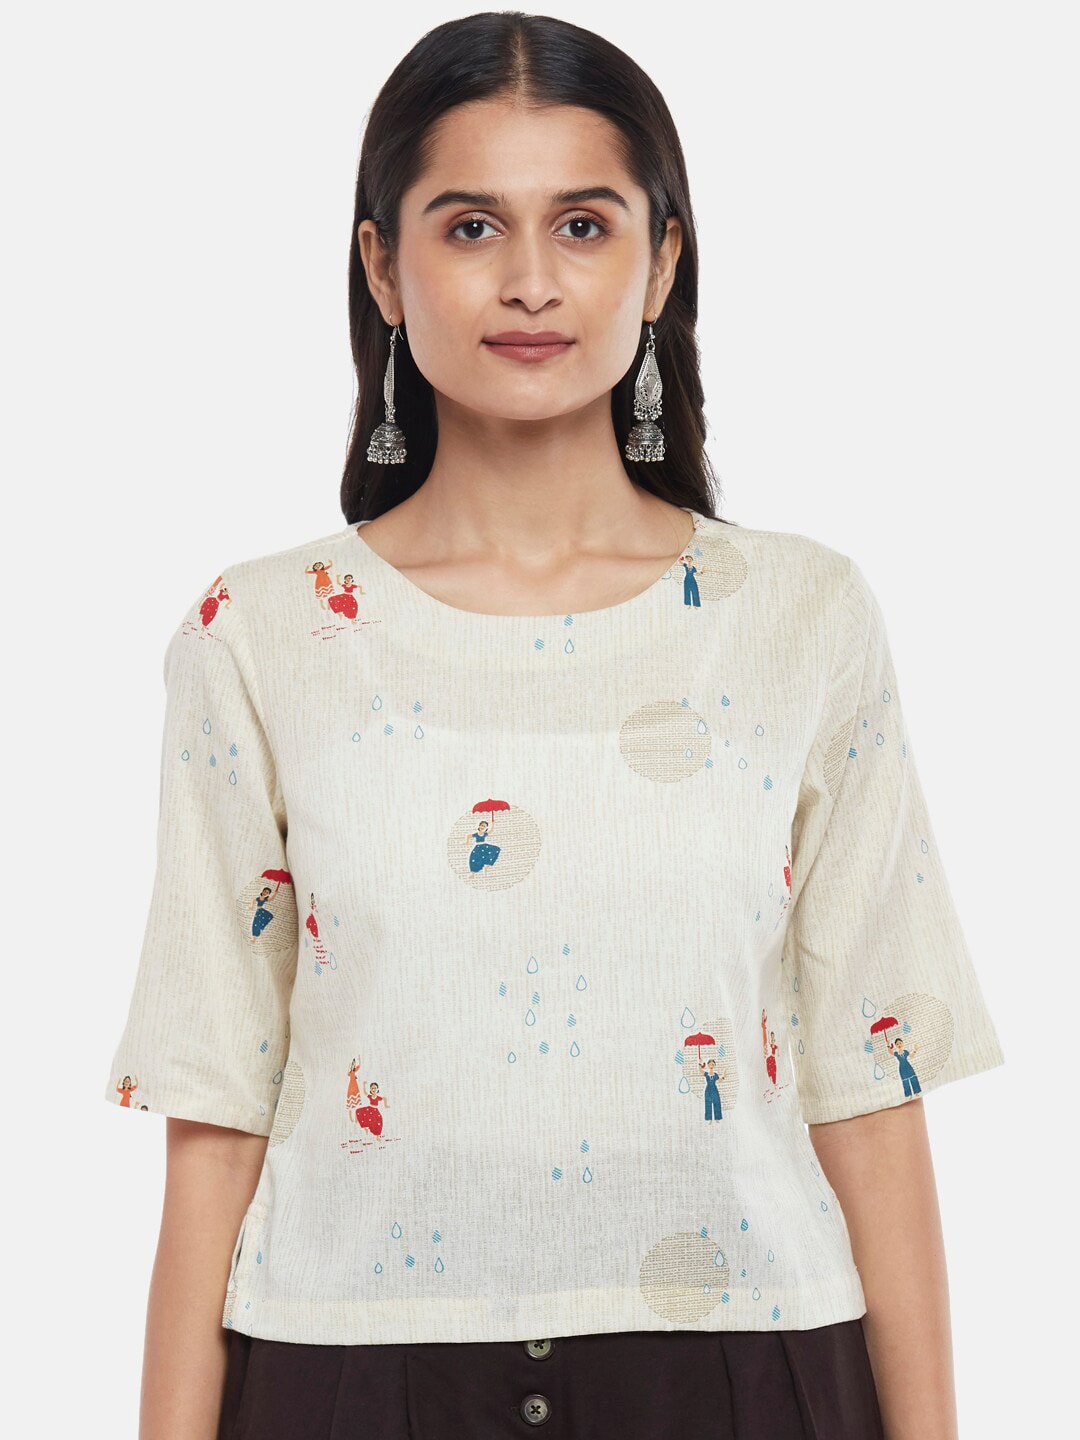 AKKRITI BY PANTALOONS Off White Embellished Top Price in India